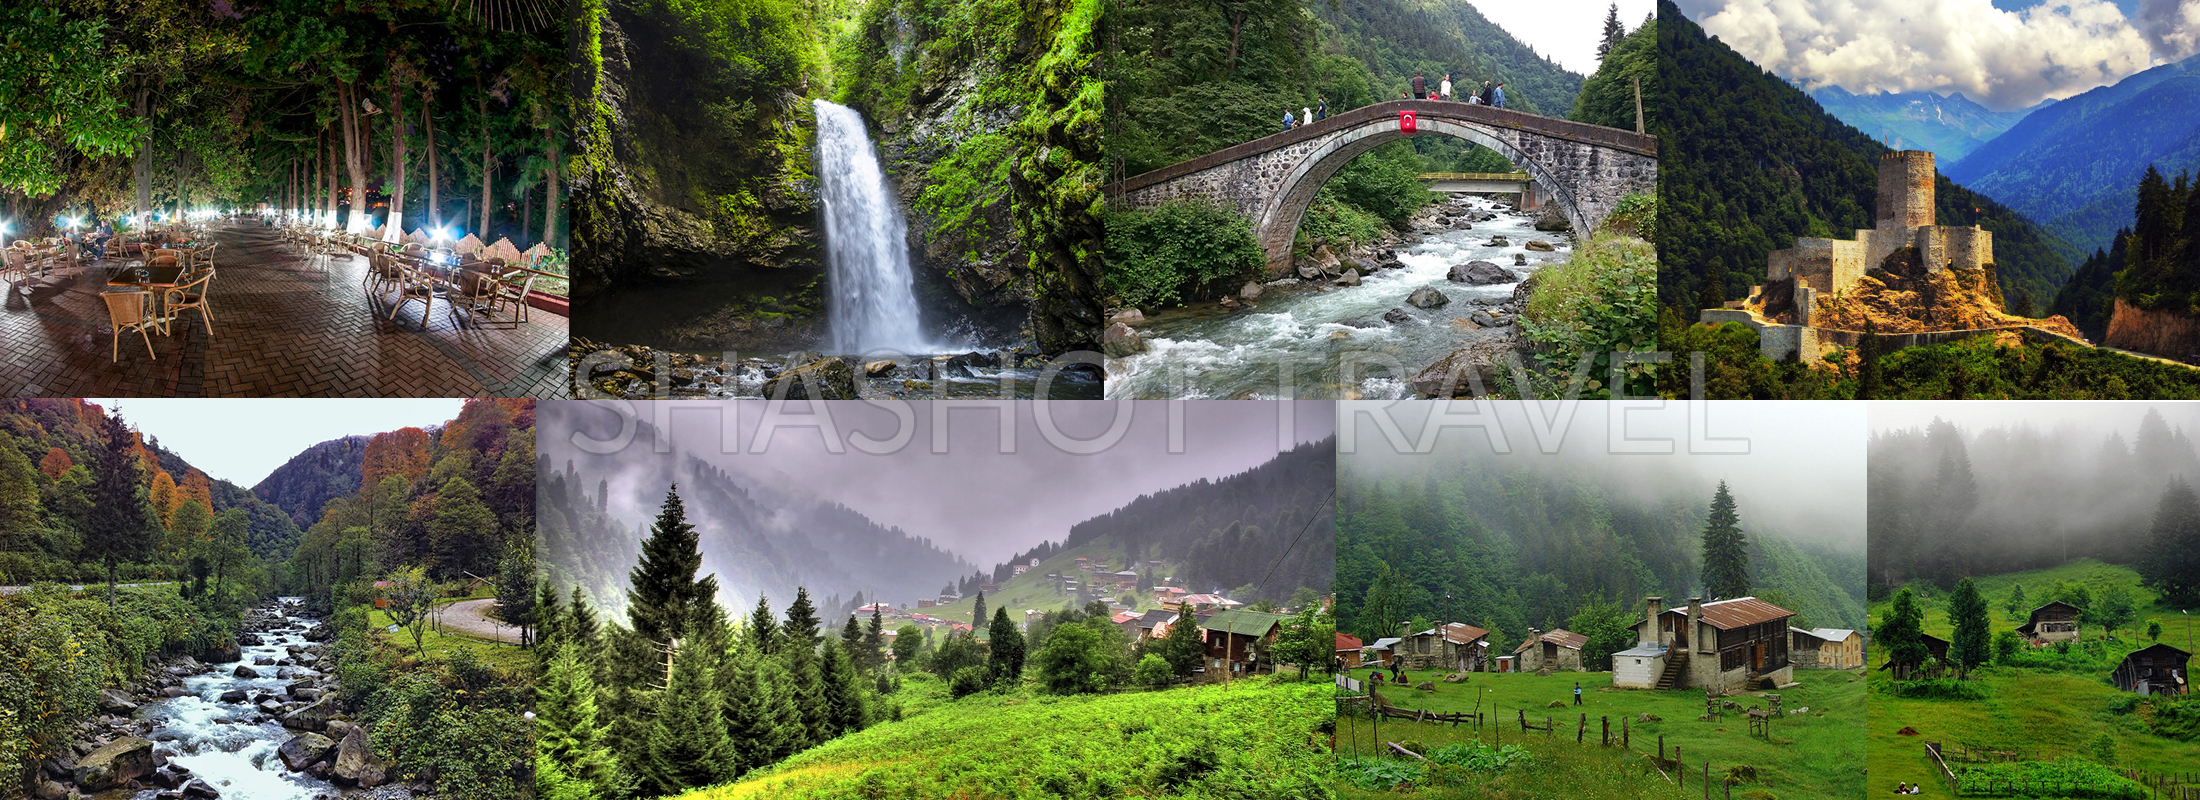 DAILY-AYDER-PLATEAU-RIZE-FIRTINA-VALLEY-PALOVIT-WATERFALL-ZIL-CASTLE-TOUR-from-trabzon